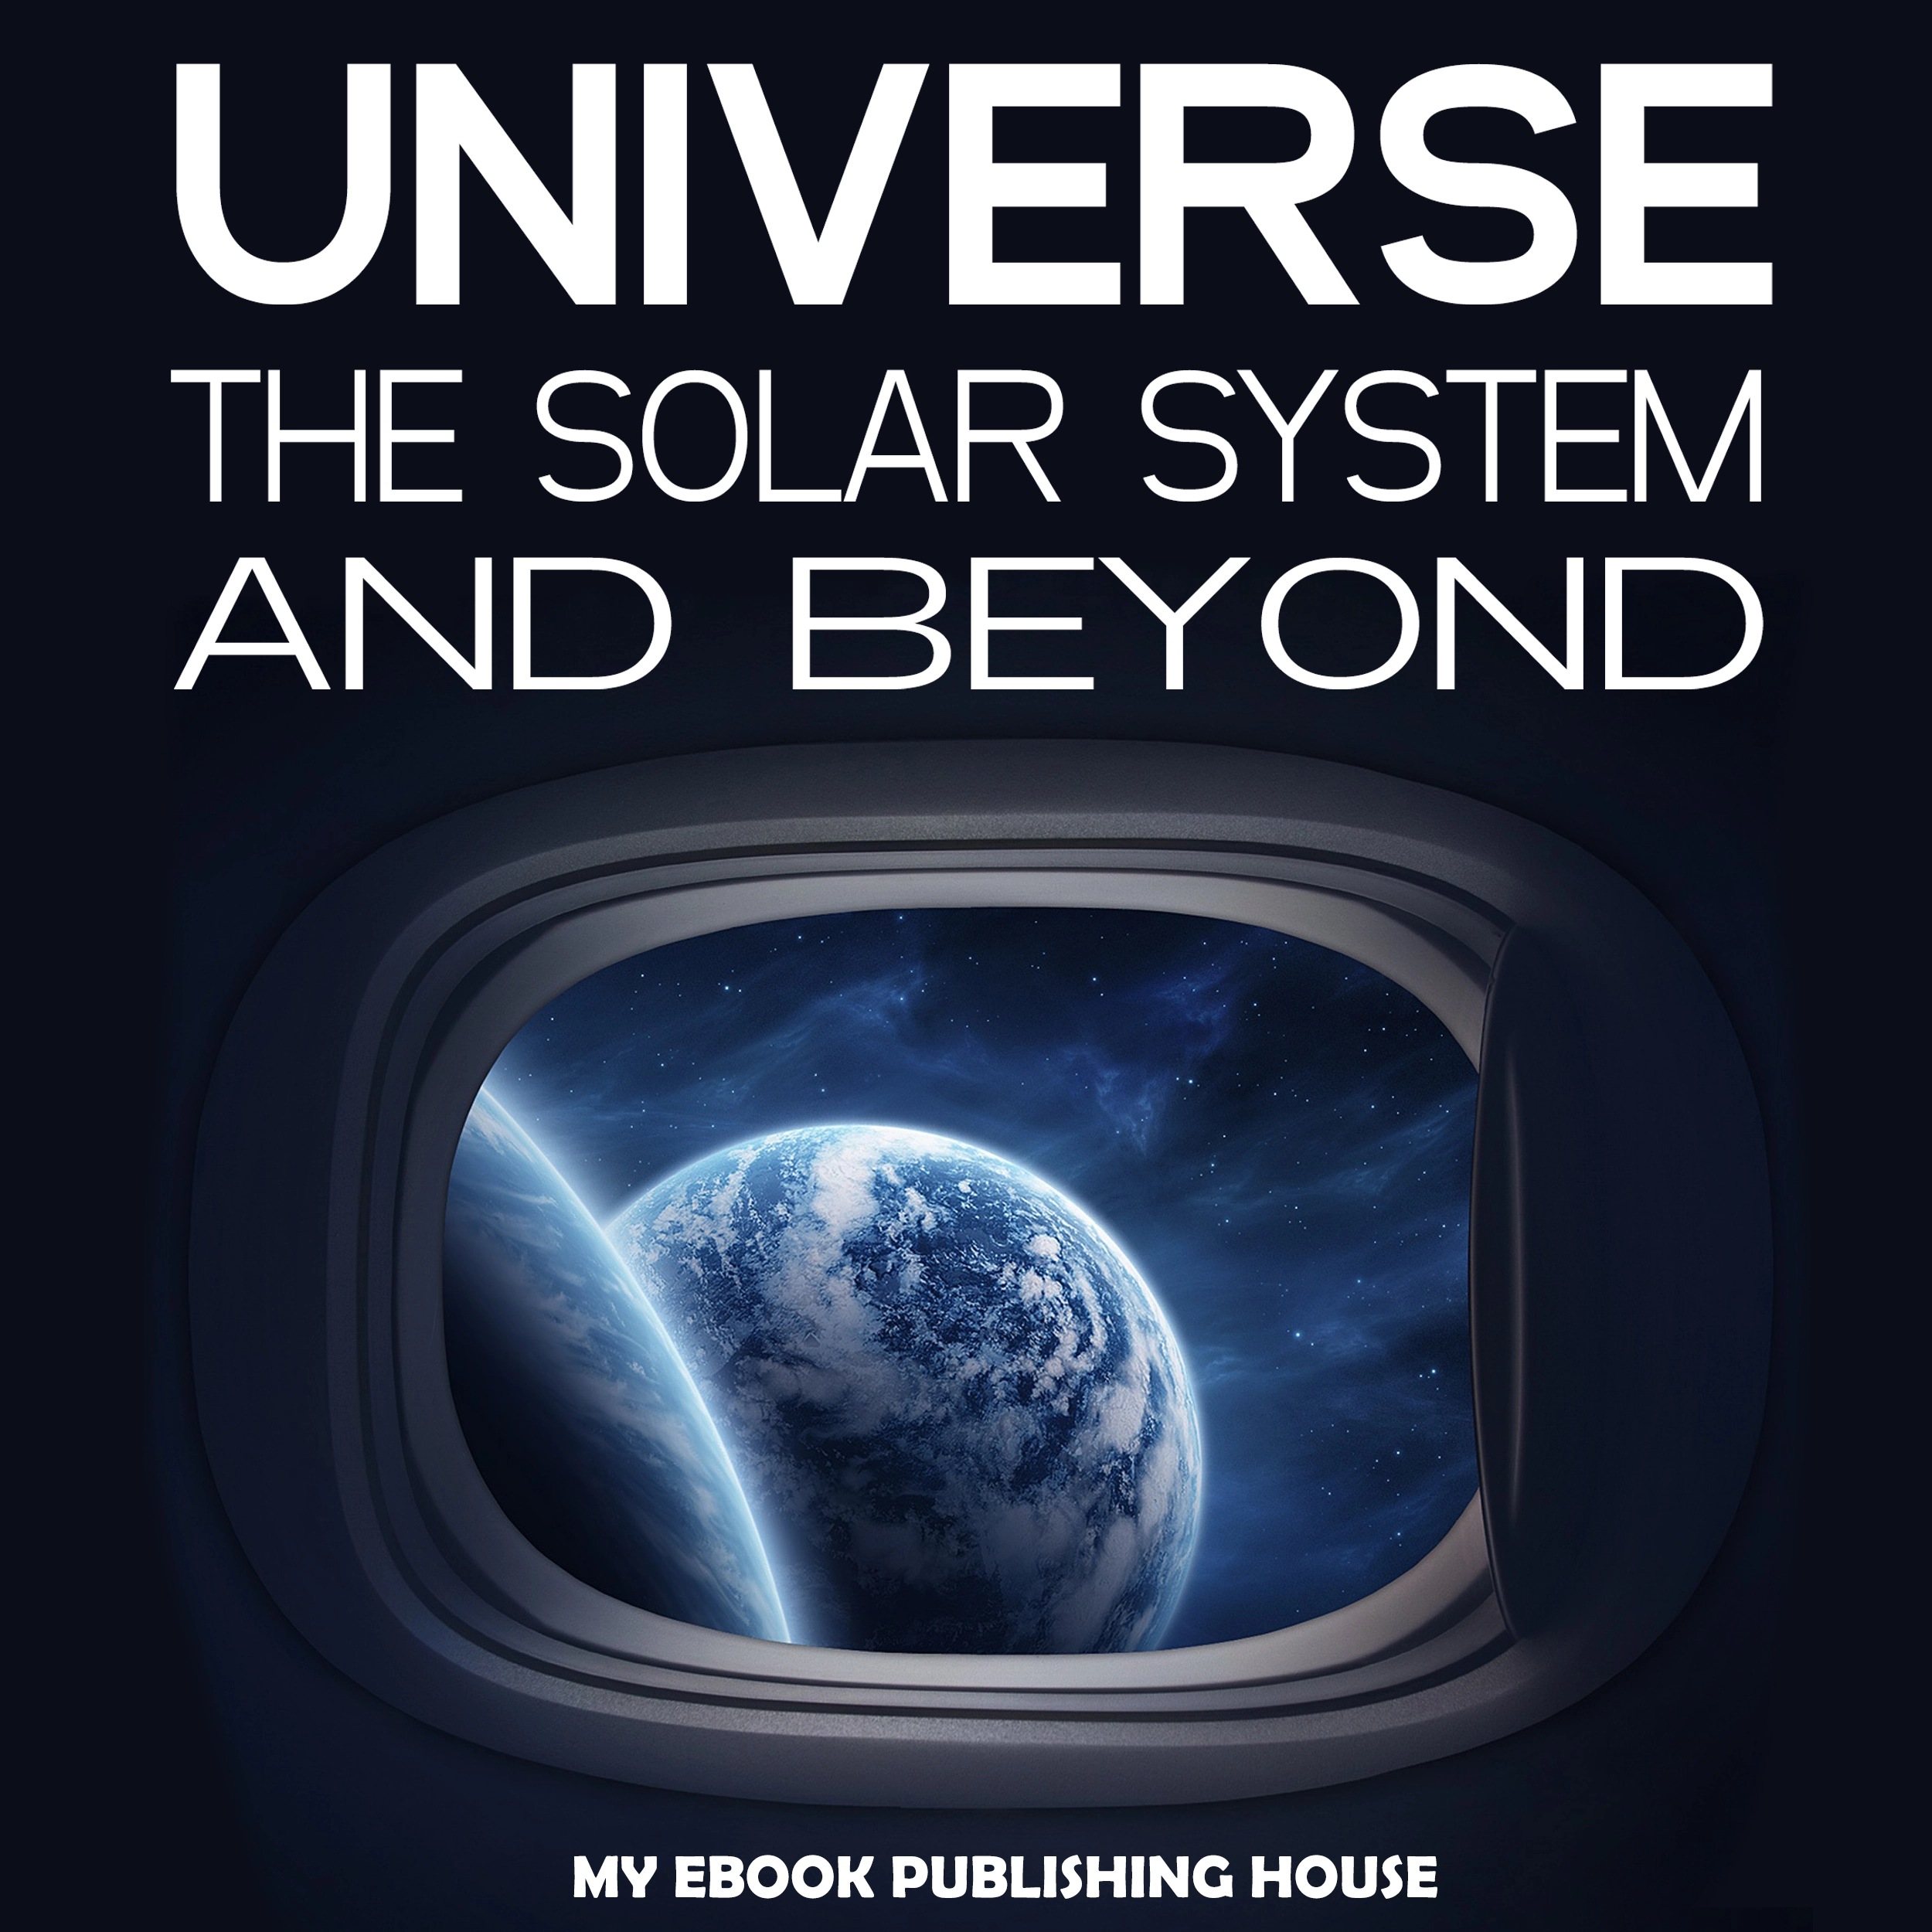 Universe: The Solar System and Beyond Audiobook by My Ebook Publishing House